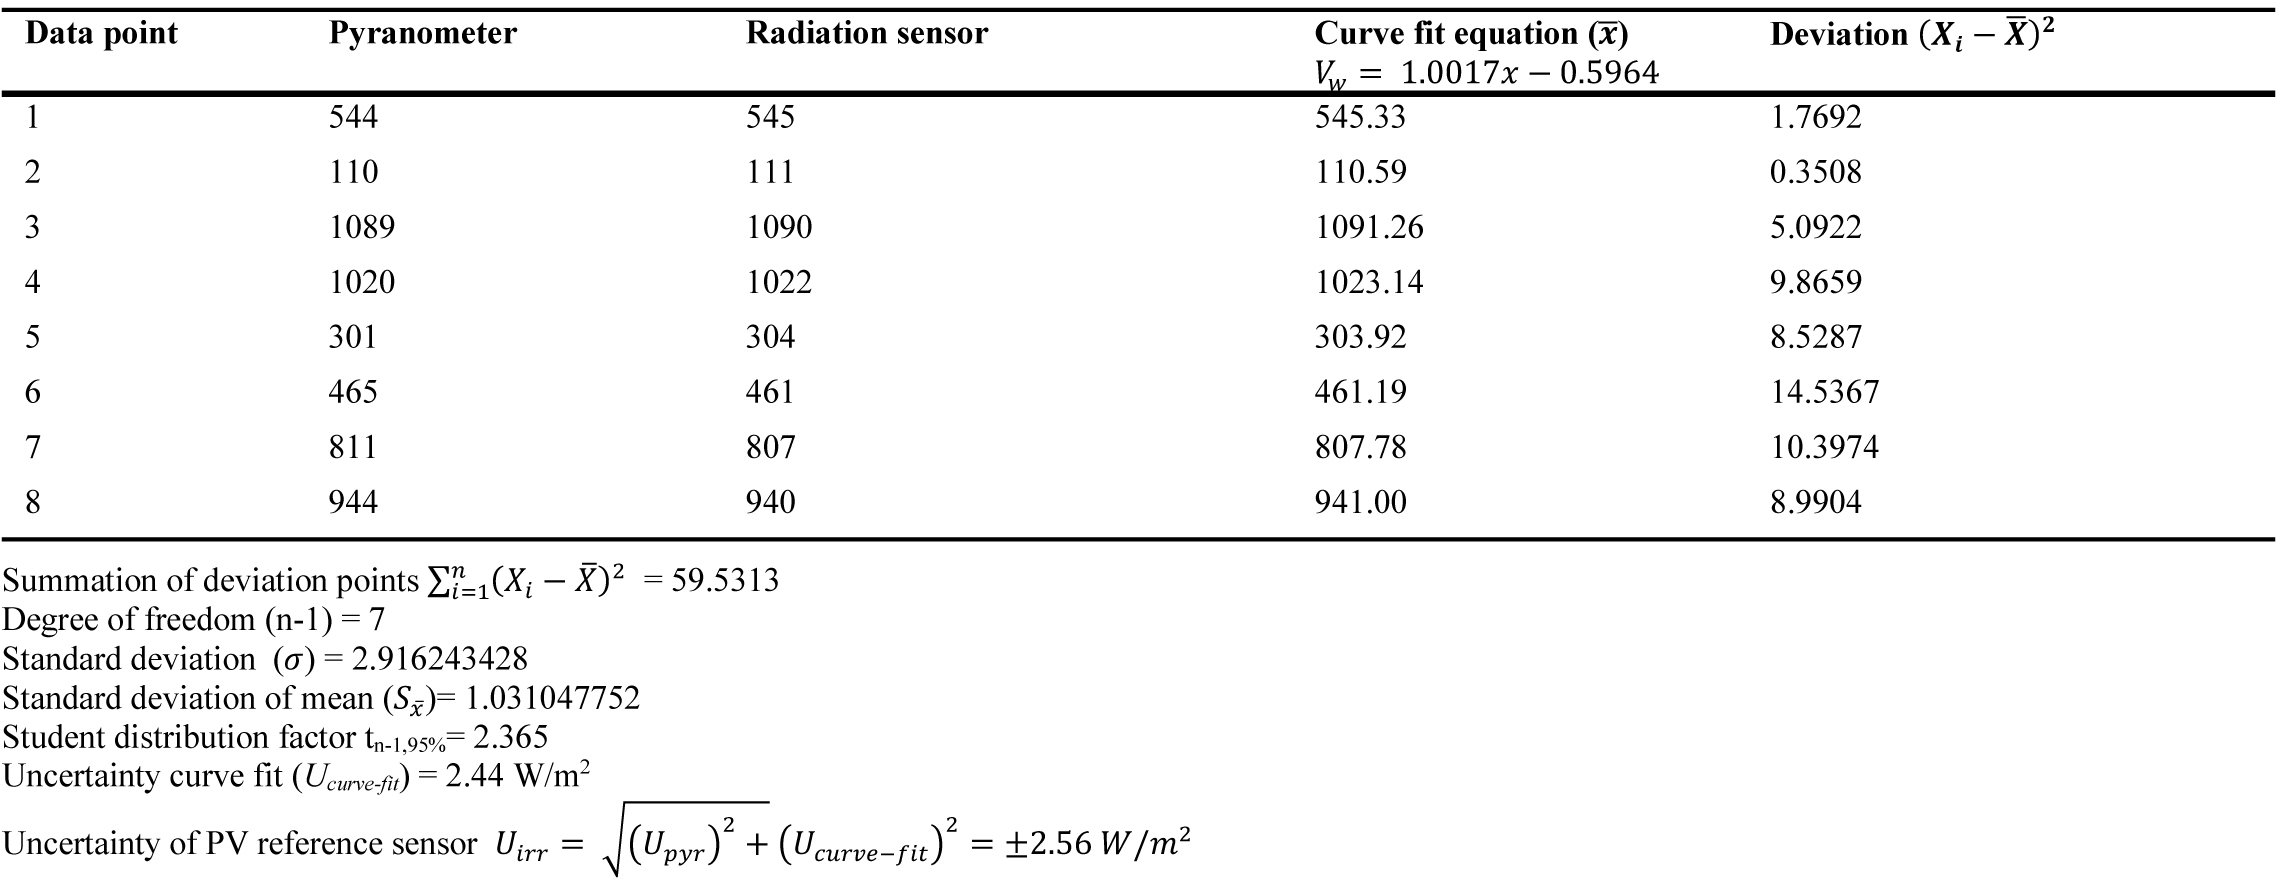 Radiation measurement at the aperture uncertainty calculations.